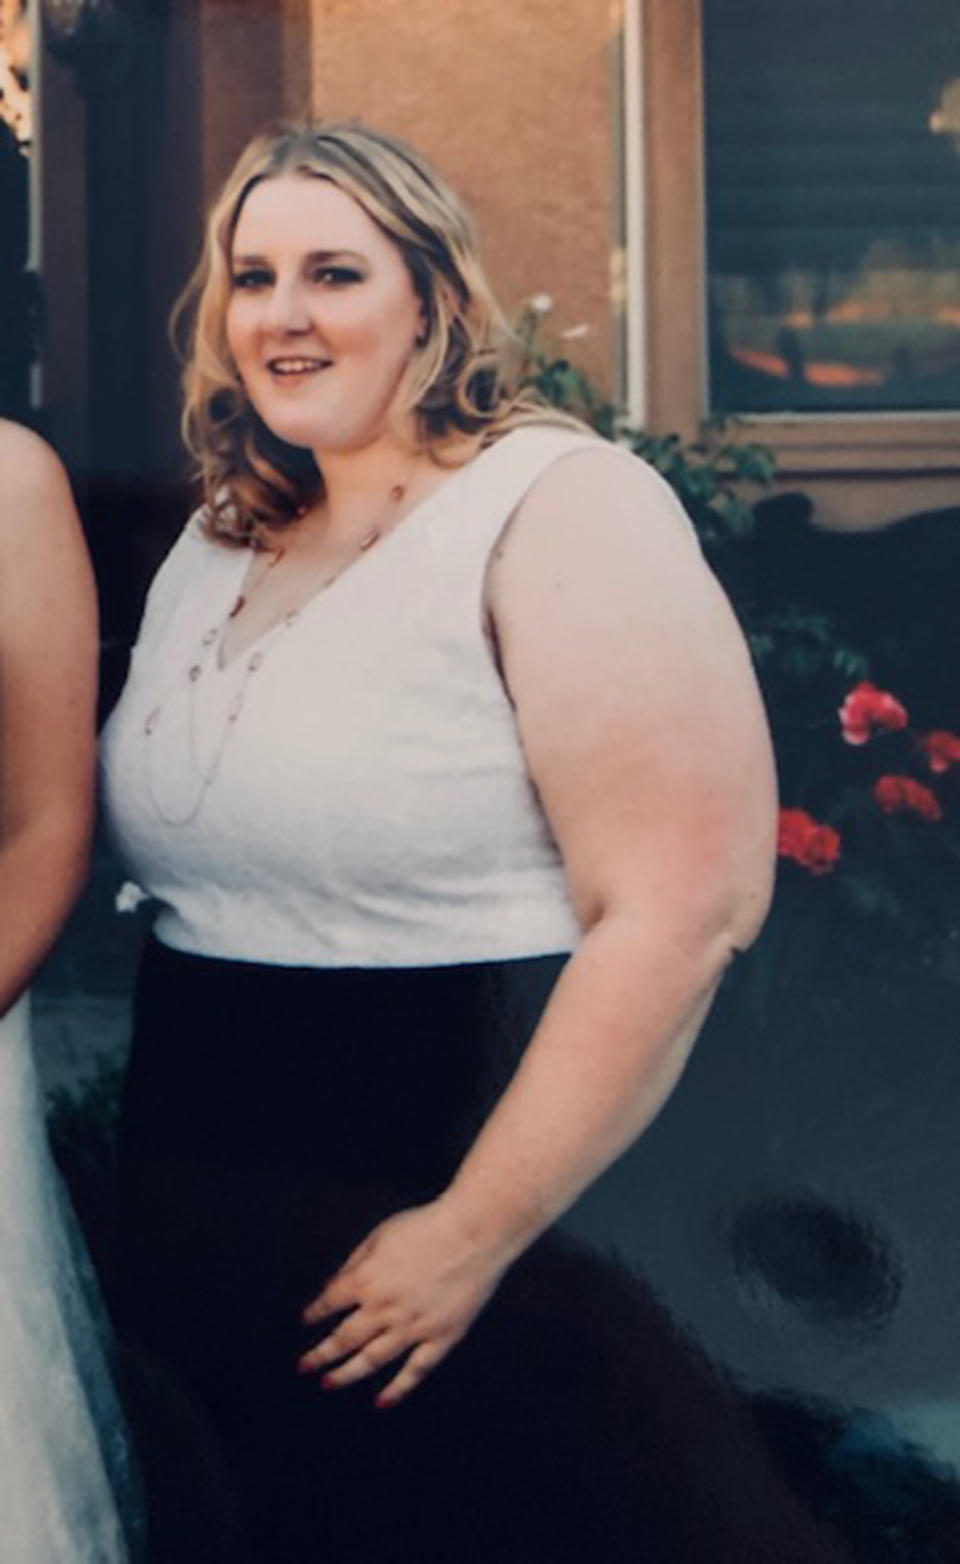 When Kayla Mehan first learned she needed to lose 150 pounds she was stunned. Then she started approaching it by losing 10 pounds at a time. (Courtesy Kayla Mehan)